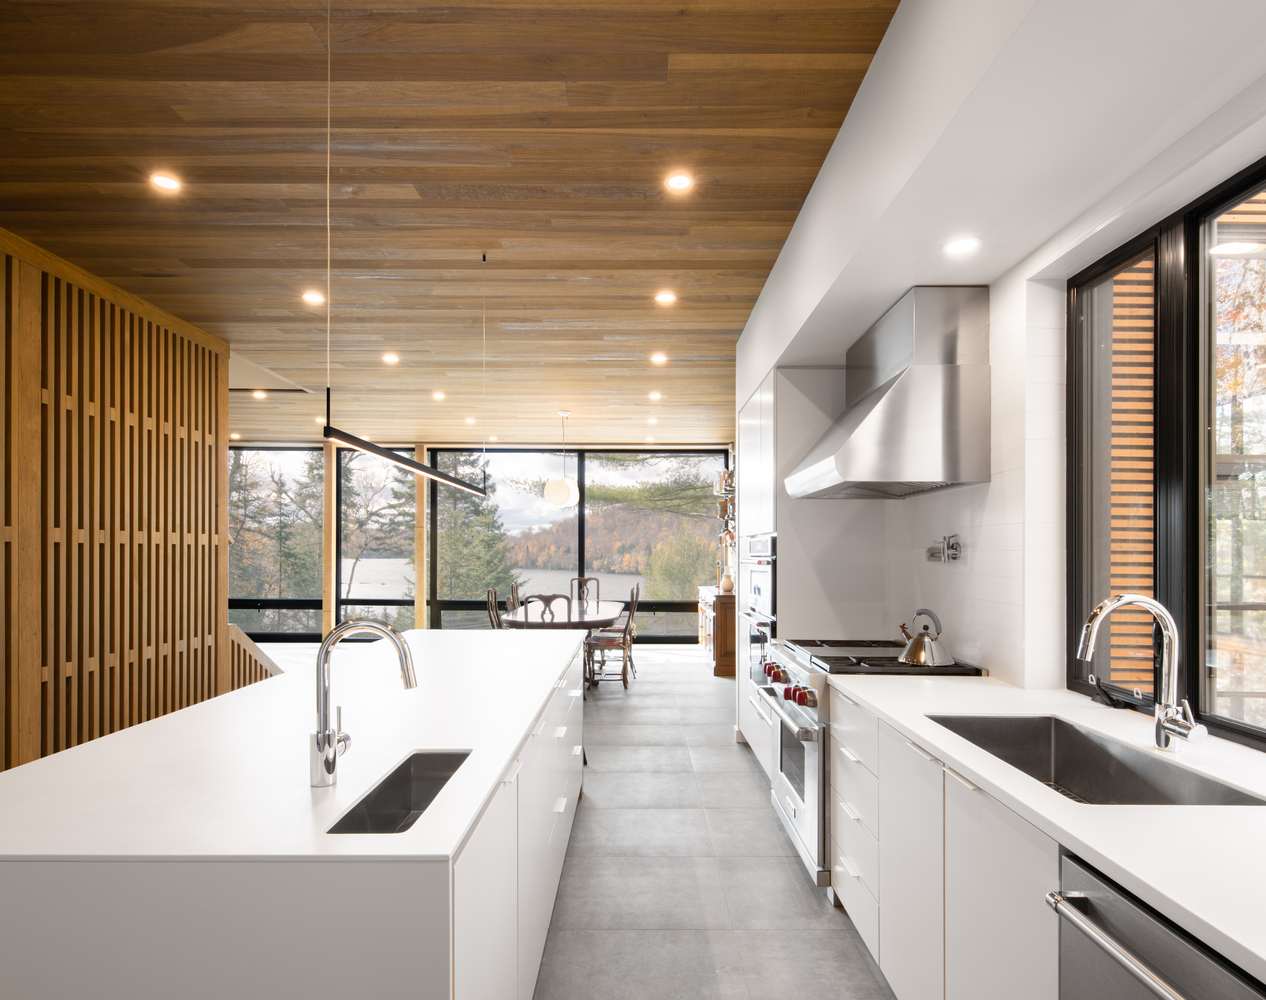 The kitchen is done with sleek white cabinets, a wooden ceiling and a concrete floor plus a wooden space divider